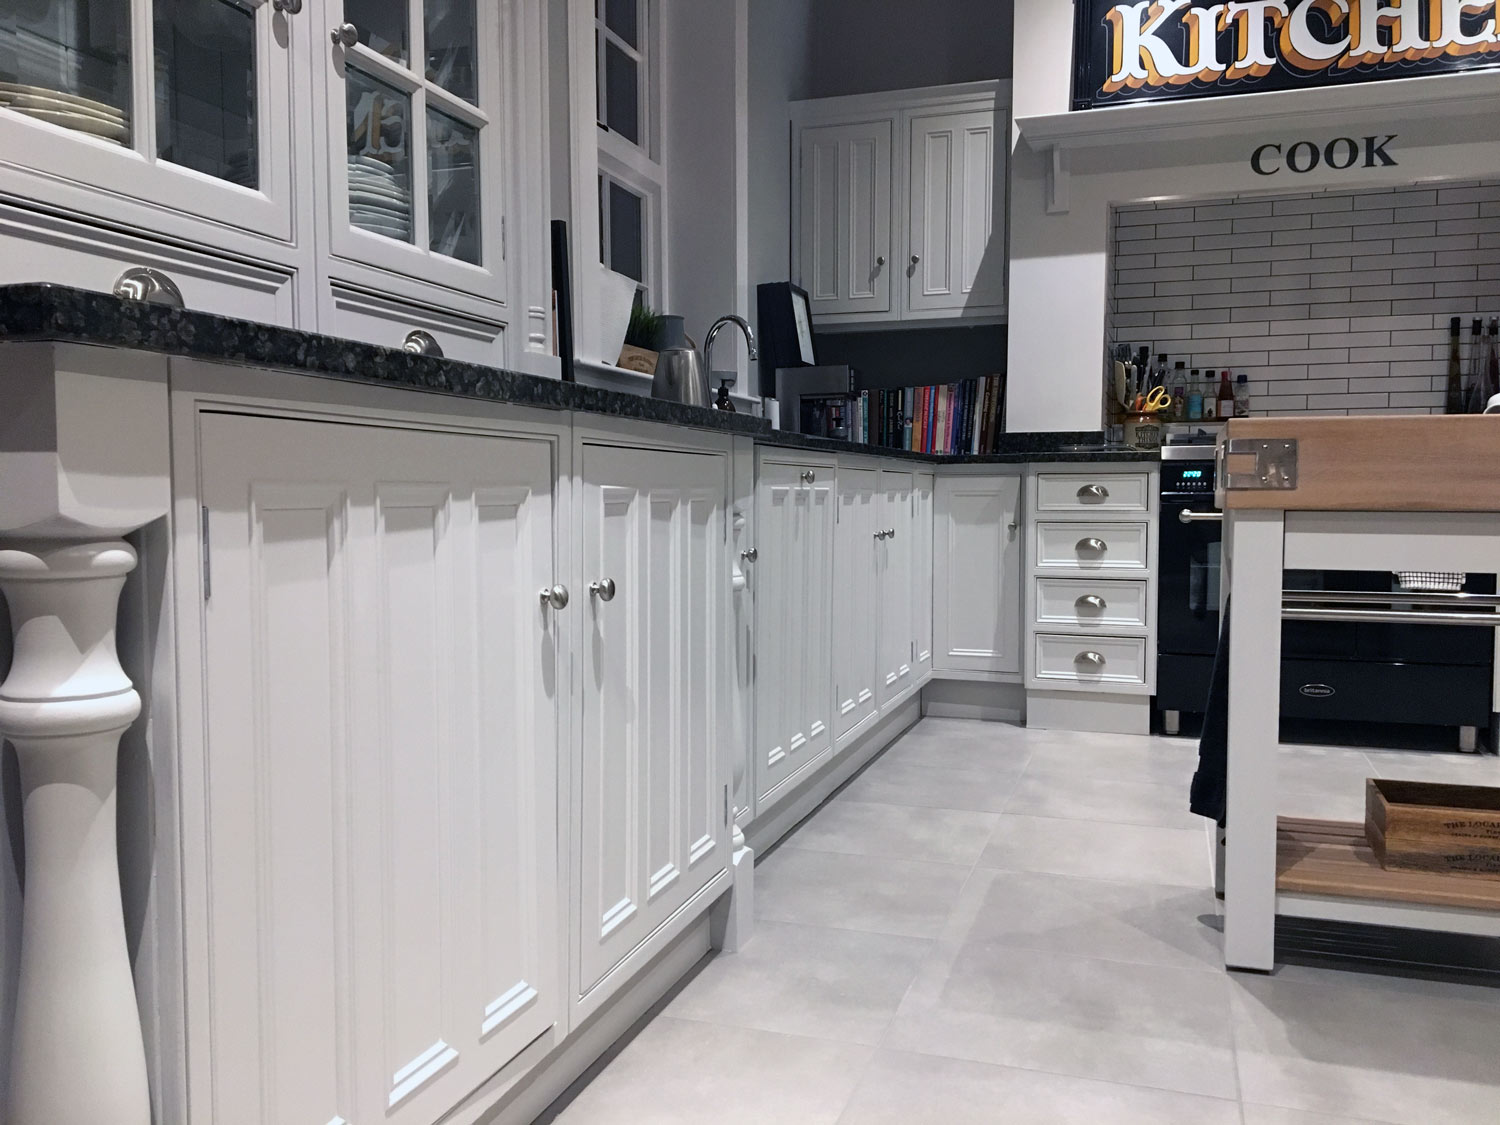 Hand painted kitchen units